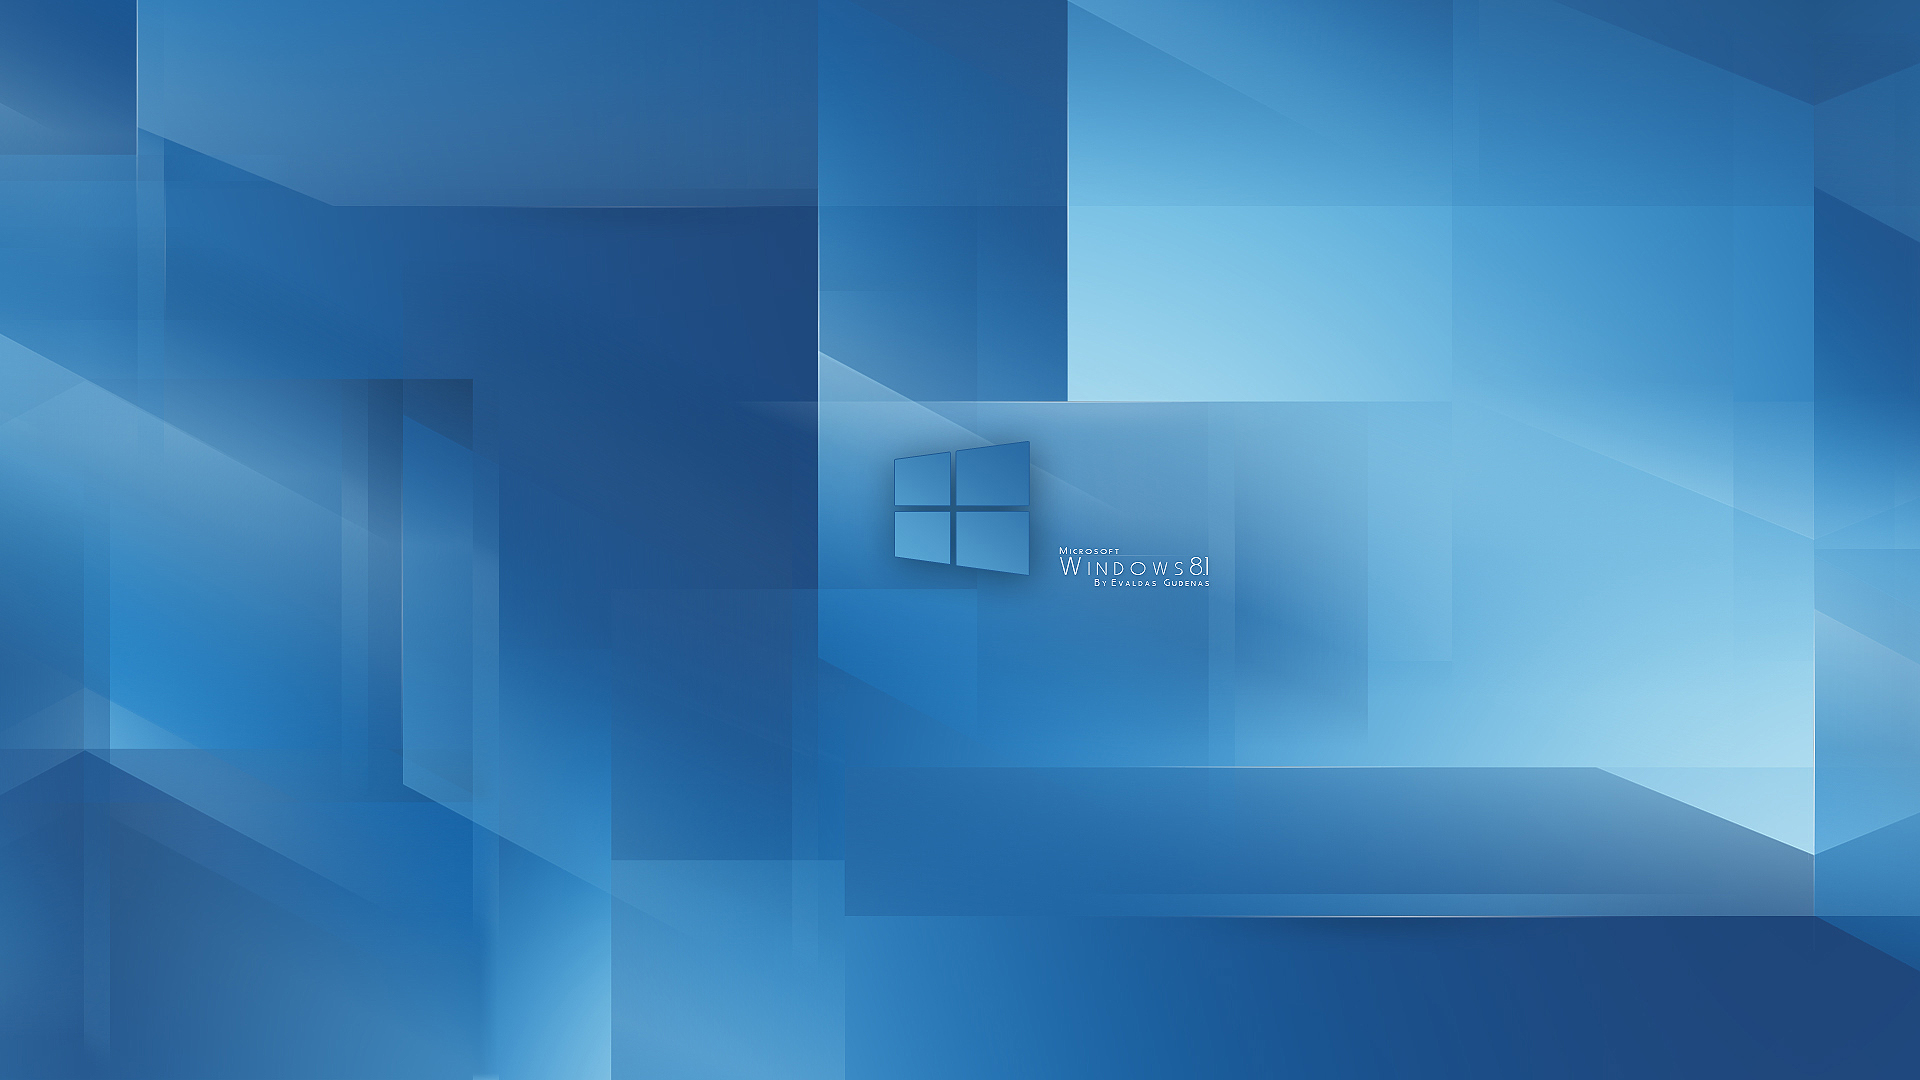 Wallpaper hd free download for windows